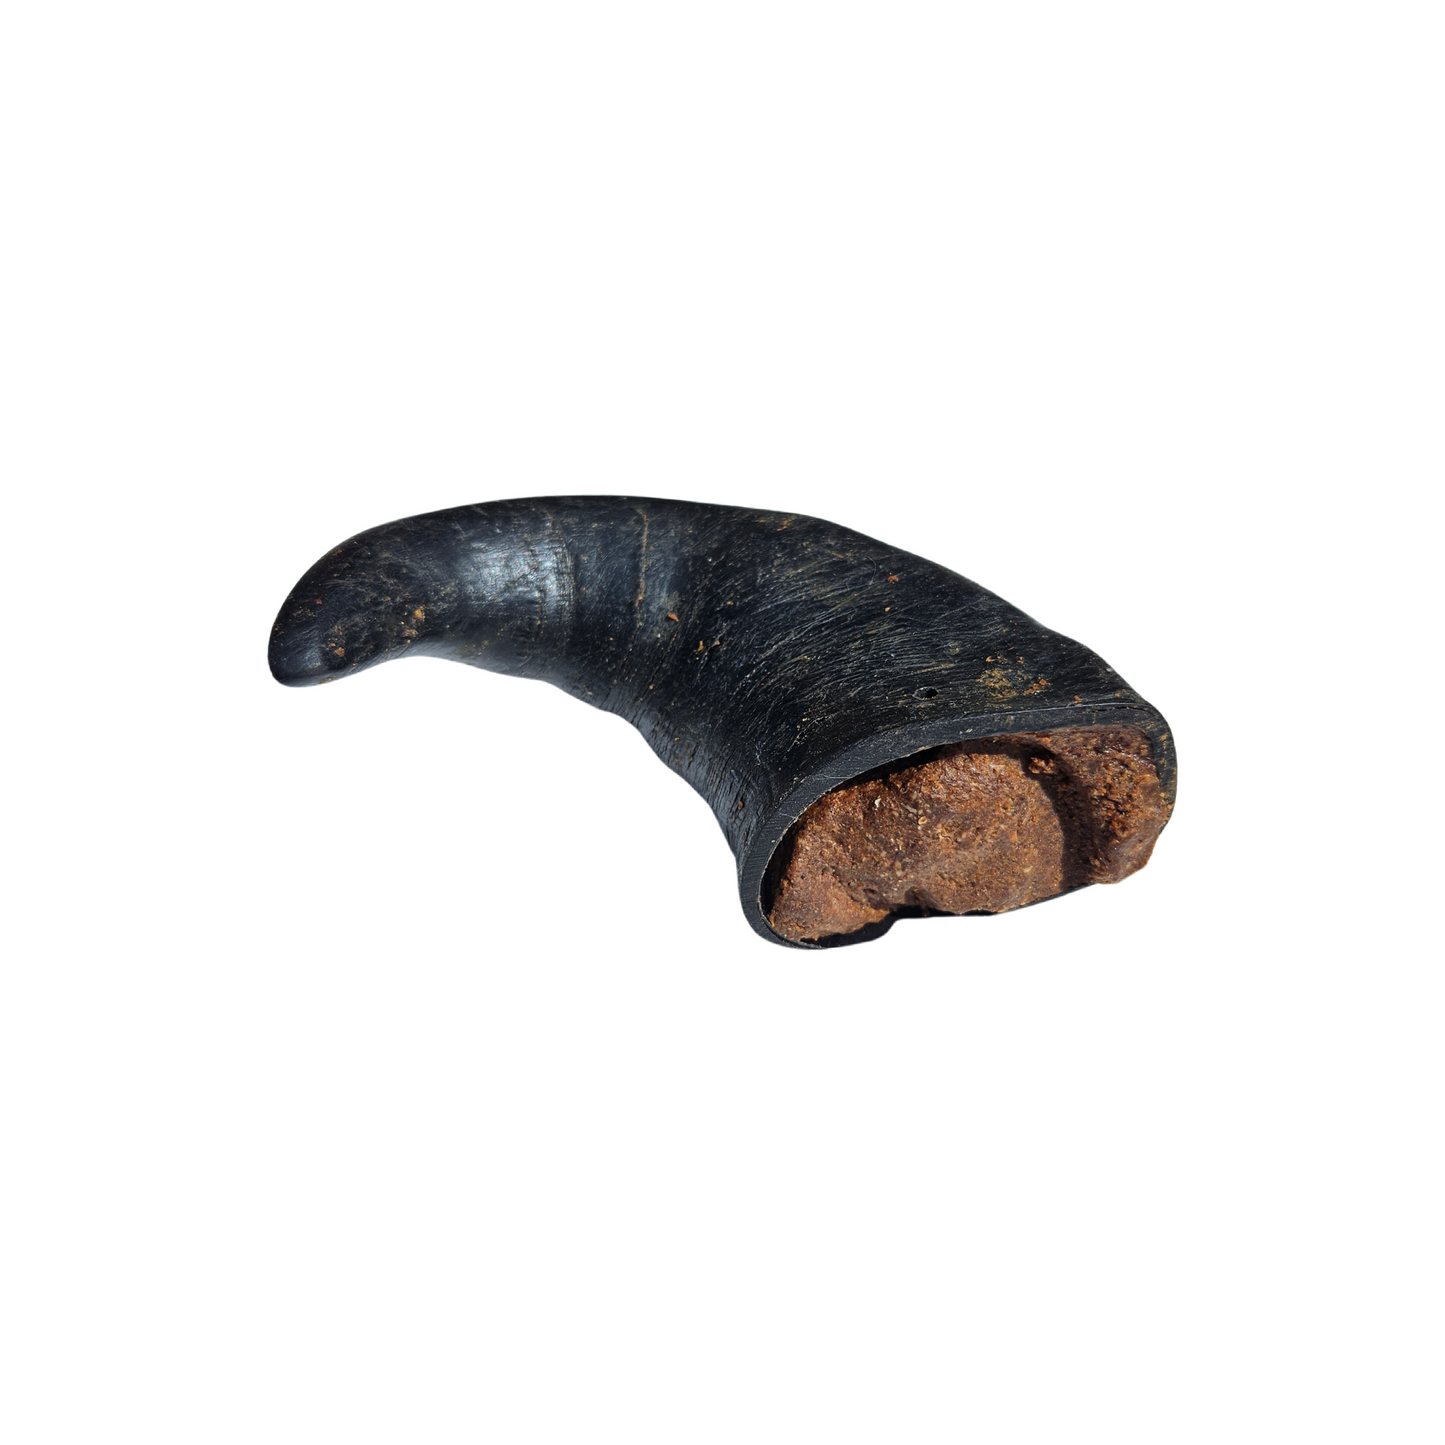 Meat filled buffalo horn - long lasting chew for dogs